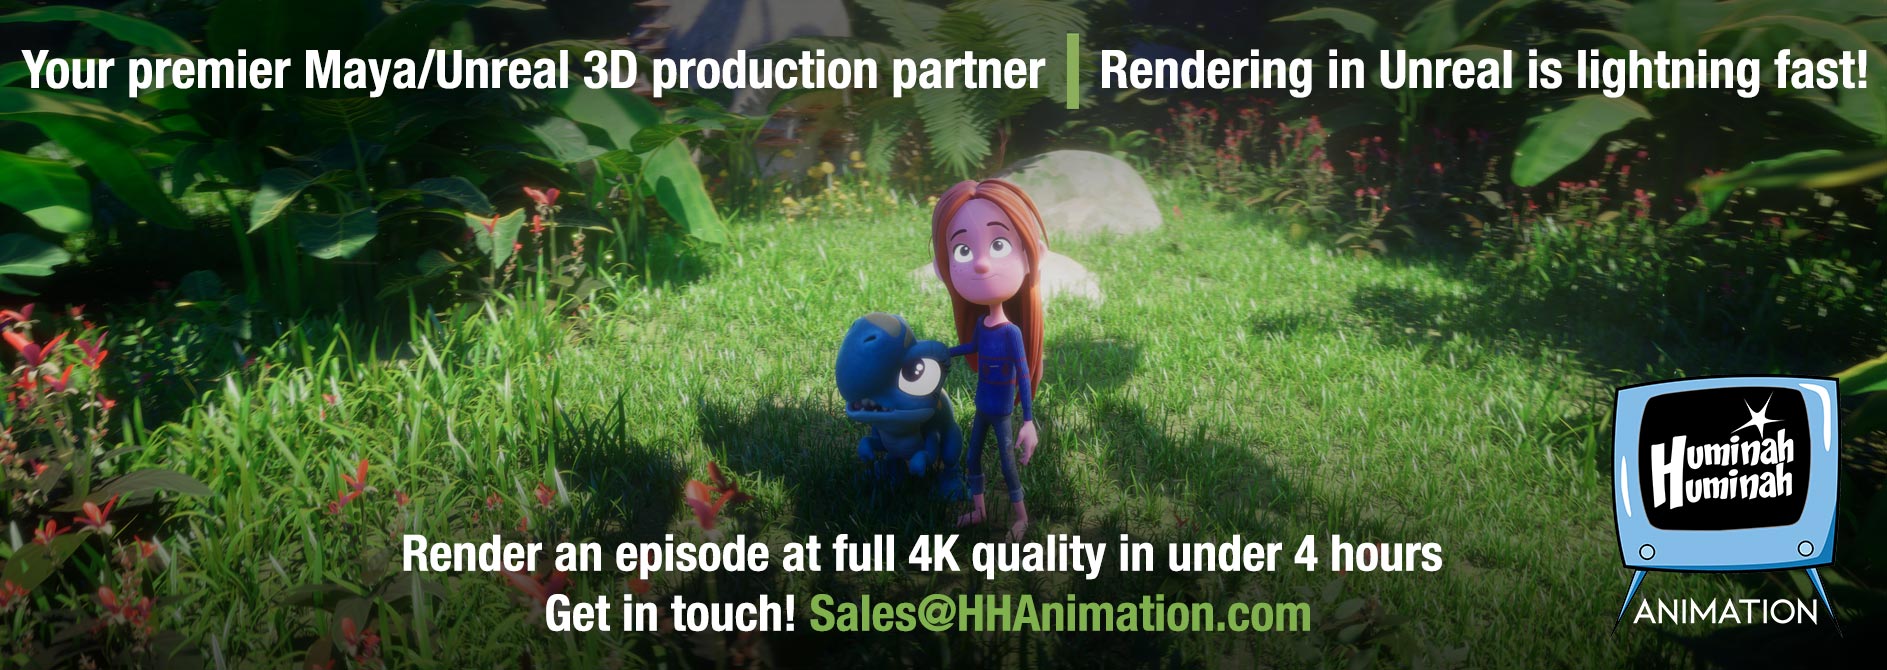 Huminah Huminah Animation Positions Itself as Your Premier 3D Unreal Partner